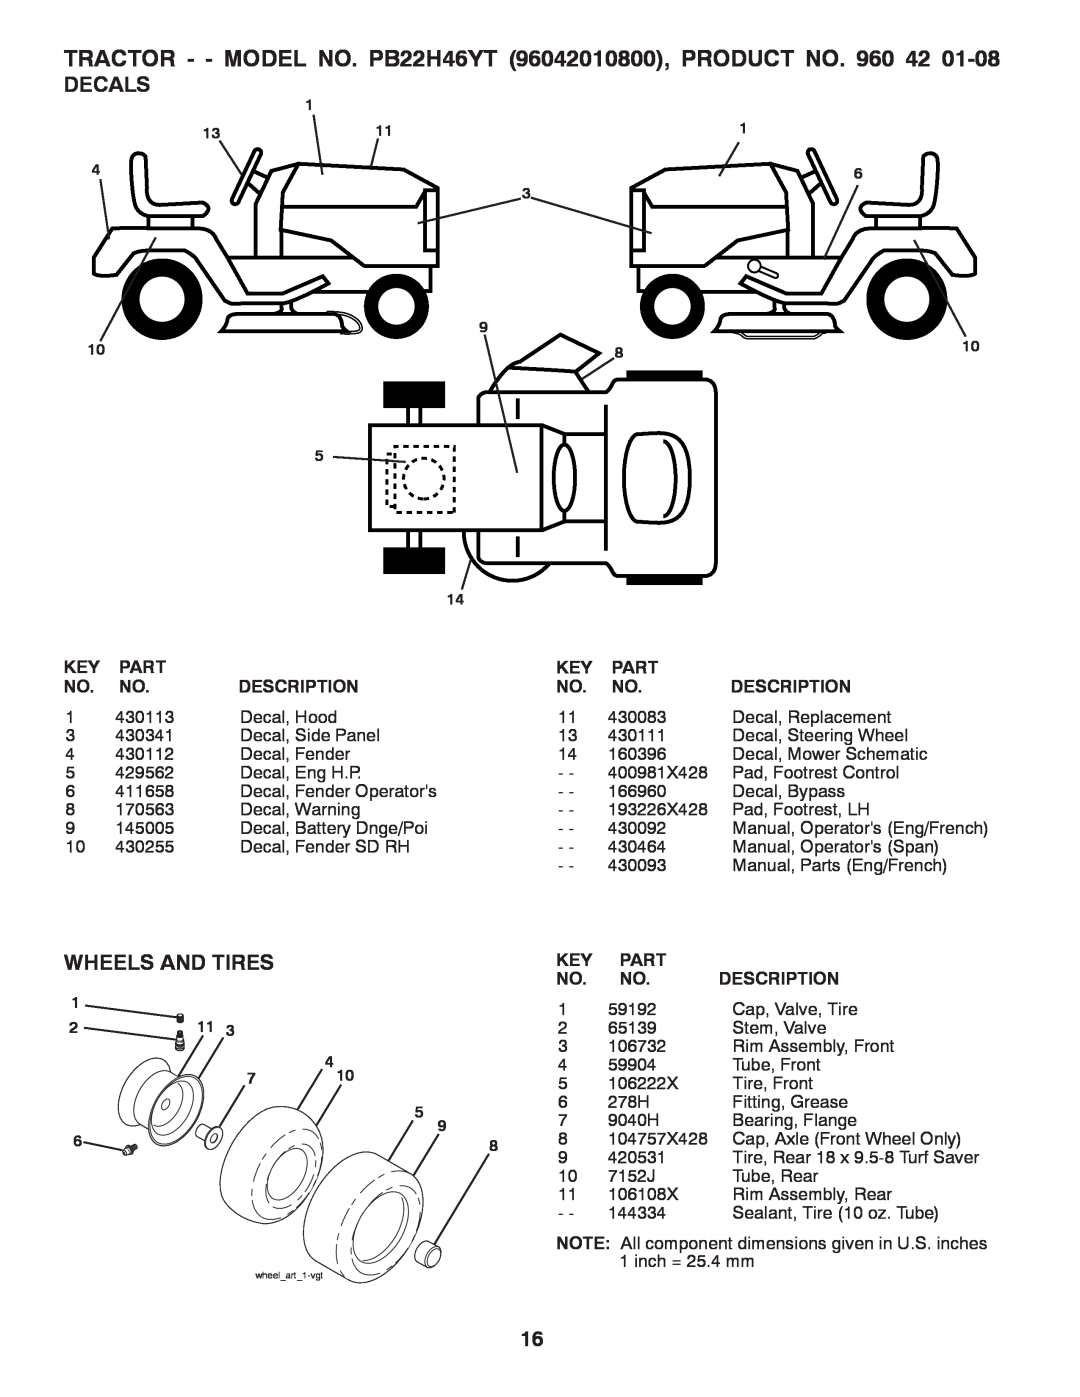 Poulan manual Decals, Wheels And Tires, TRACTOR - - MODEL NO. PB22H46YT 96042010800, PRODUCT NO. 960, wheelart1-vgt 